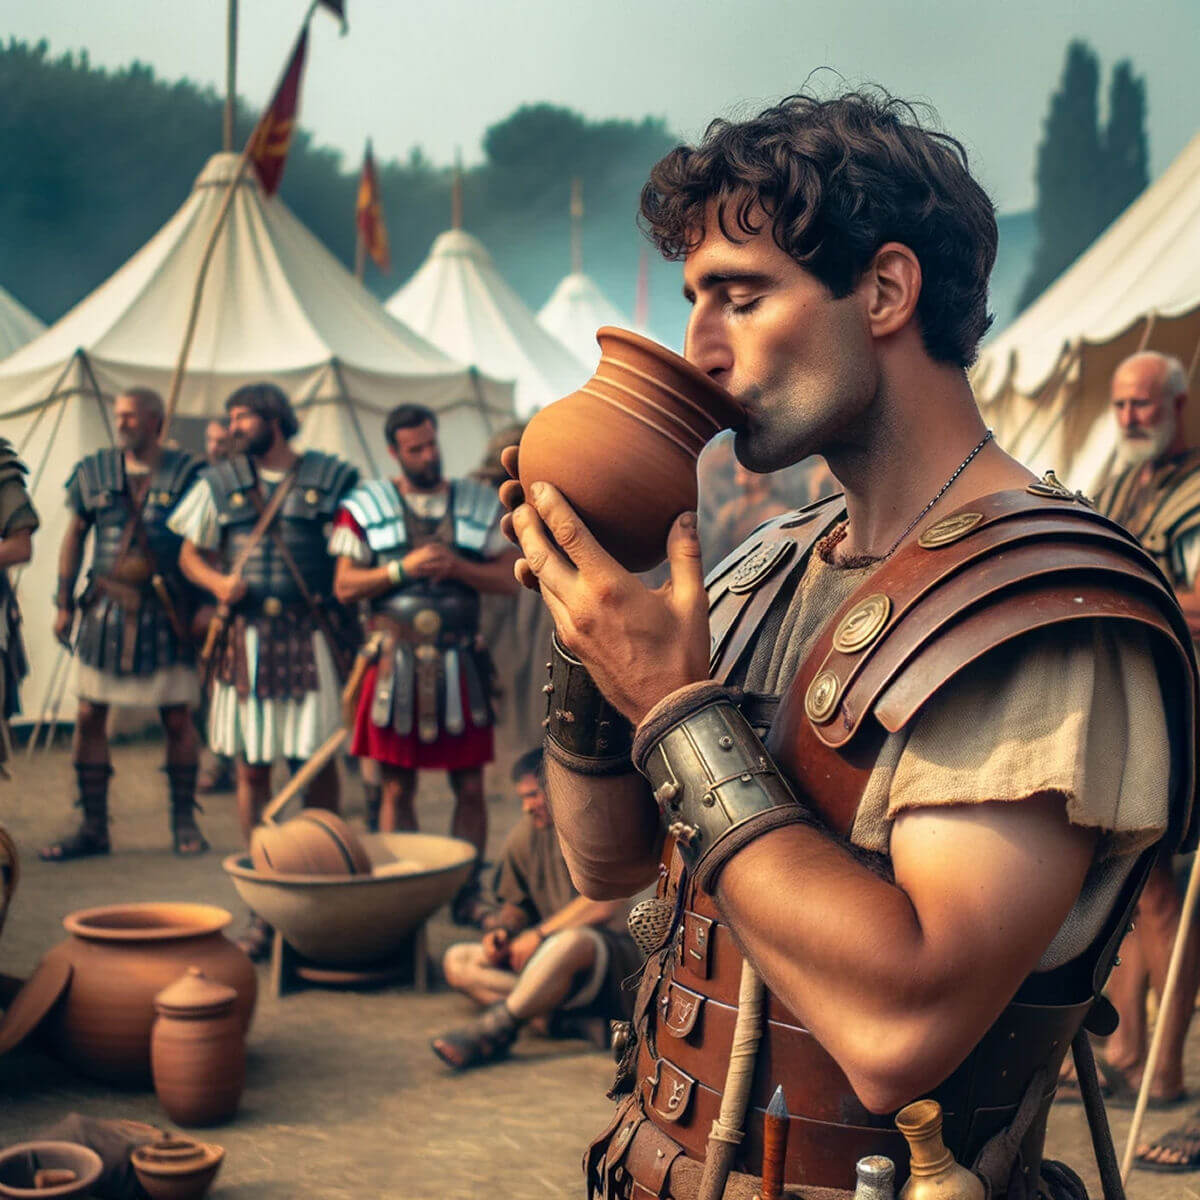 A Roman legionary soldier drinking from a clay cup